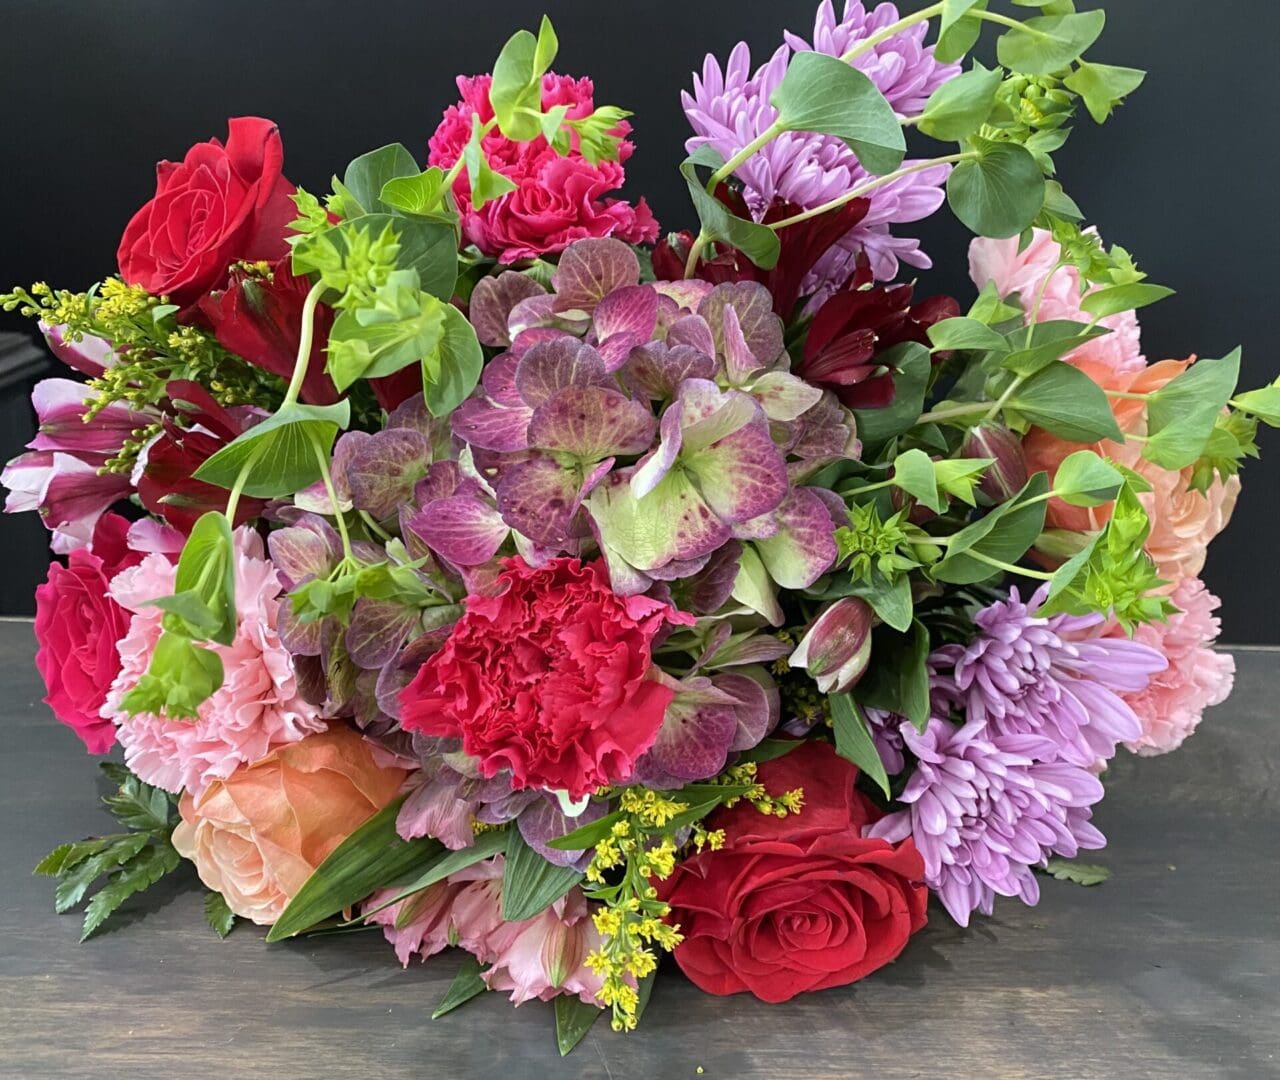 A bundle of purple and pink flowers of different types